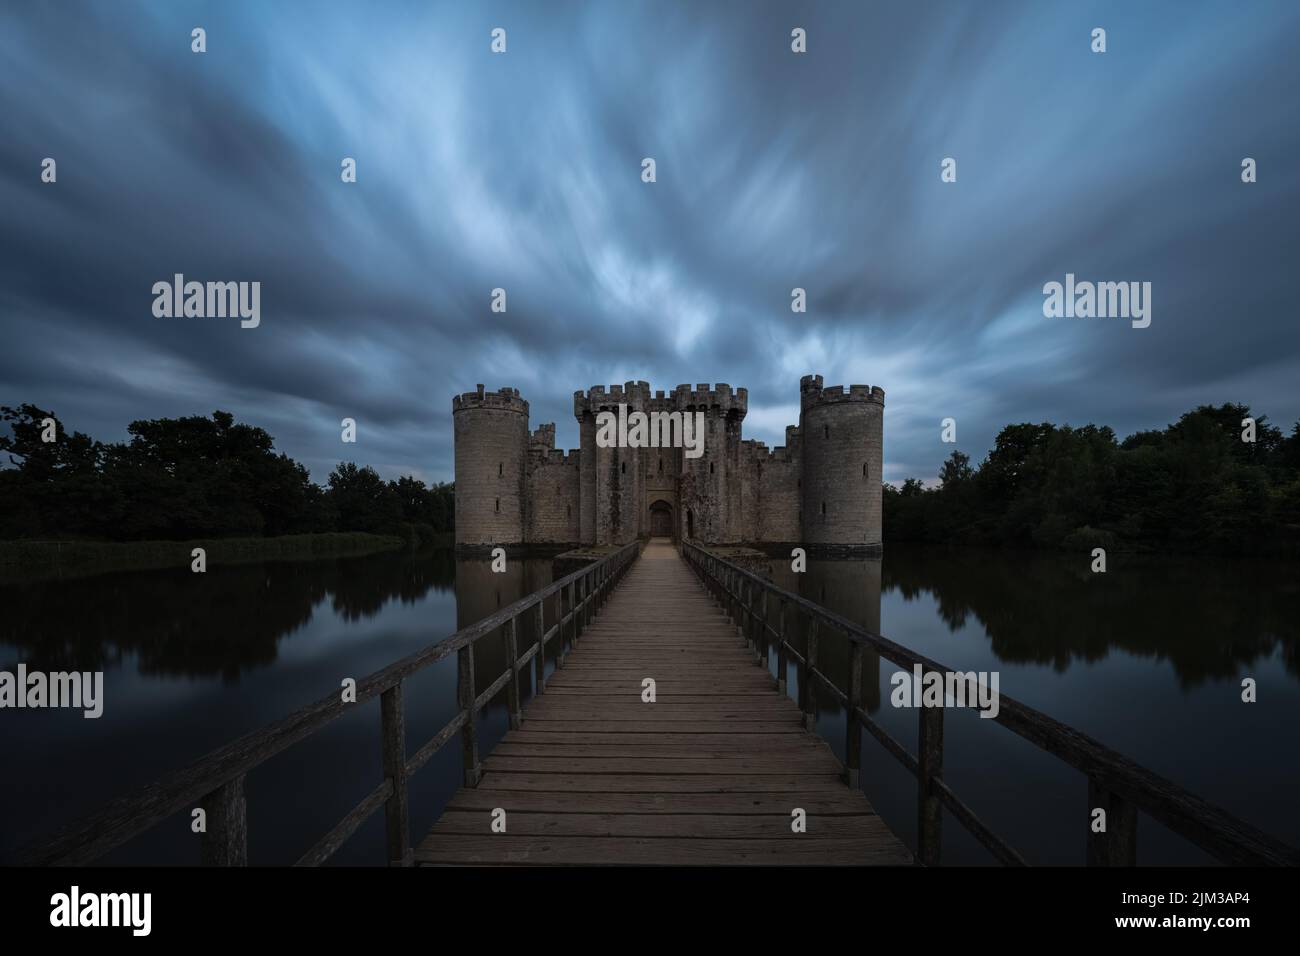 Long exposure image of Bodiam Castle in East Sussex at sunset with the castle and trees reflected in the surrounding moat Stock Photo